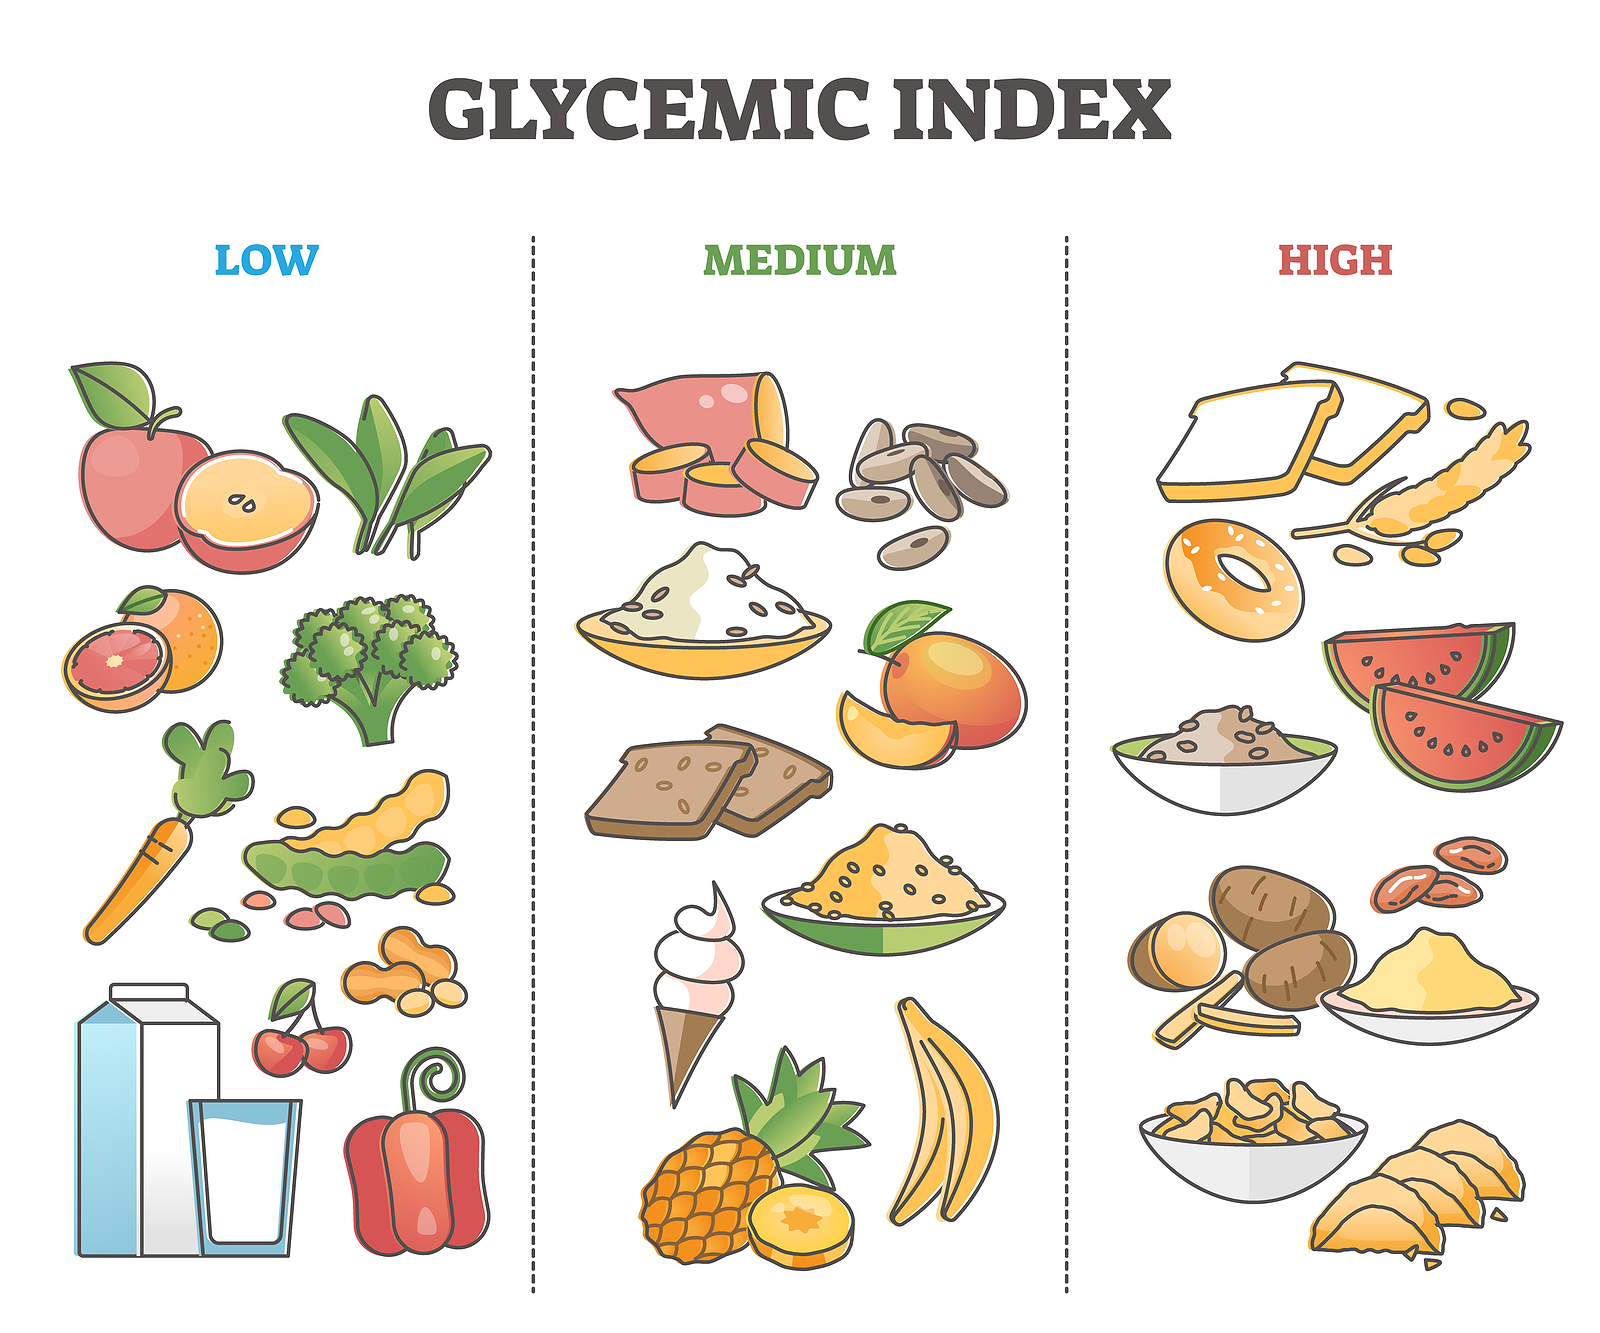 Glycemic index food division as grocery product sugar levels outline diagram